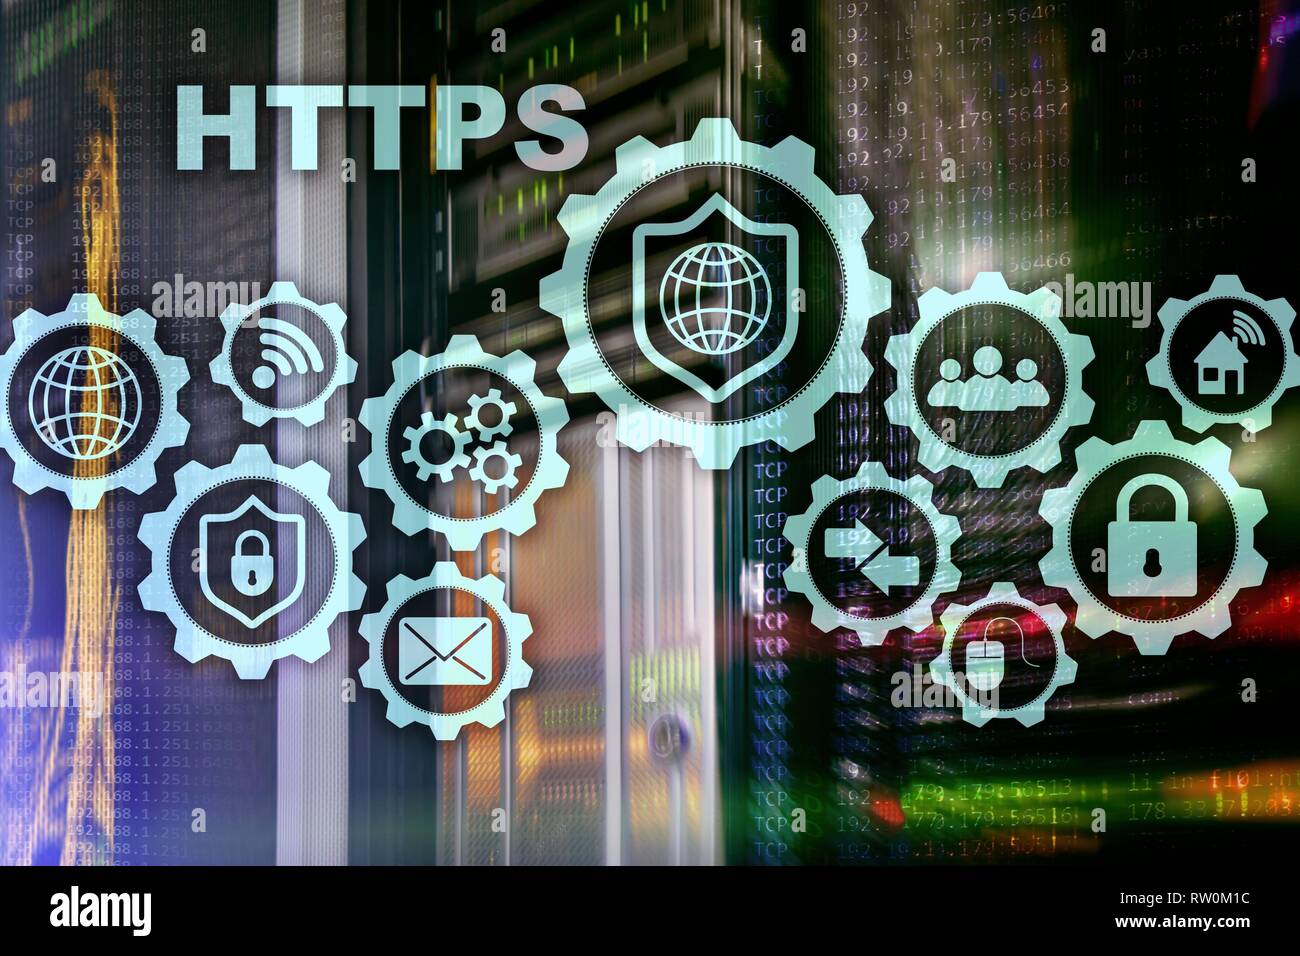 HTTPS. Hypertext Transport Protocol Secure. Technology Concept on Server Room Background. Virtual Icon for network security web service Stock Photo